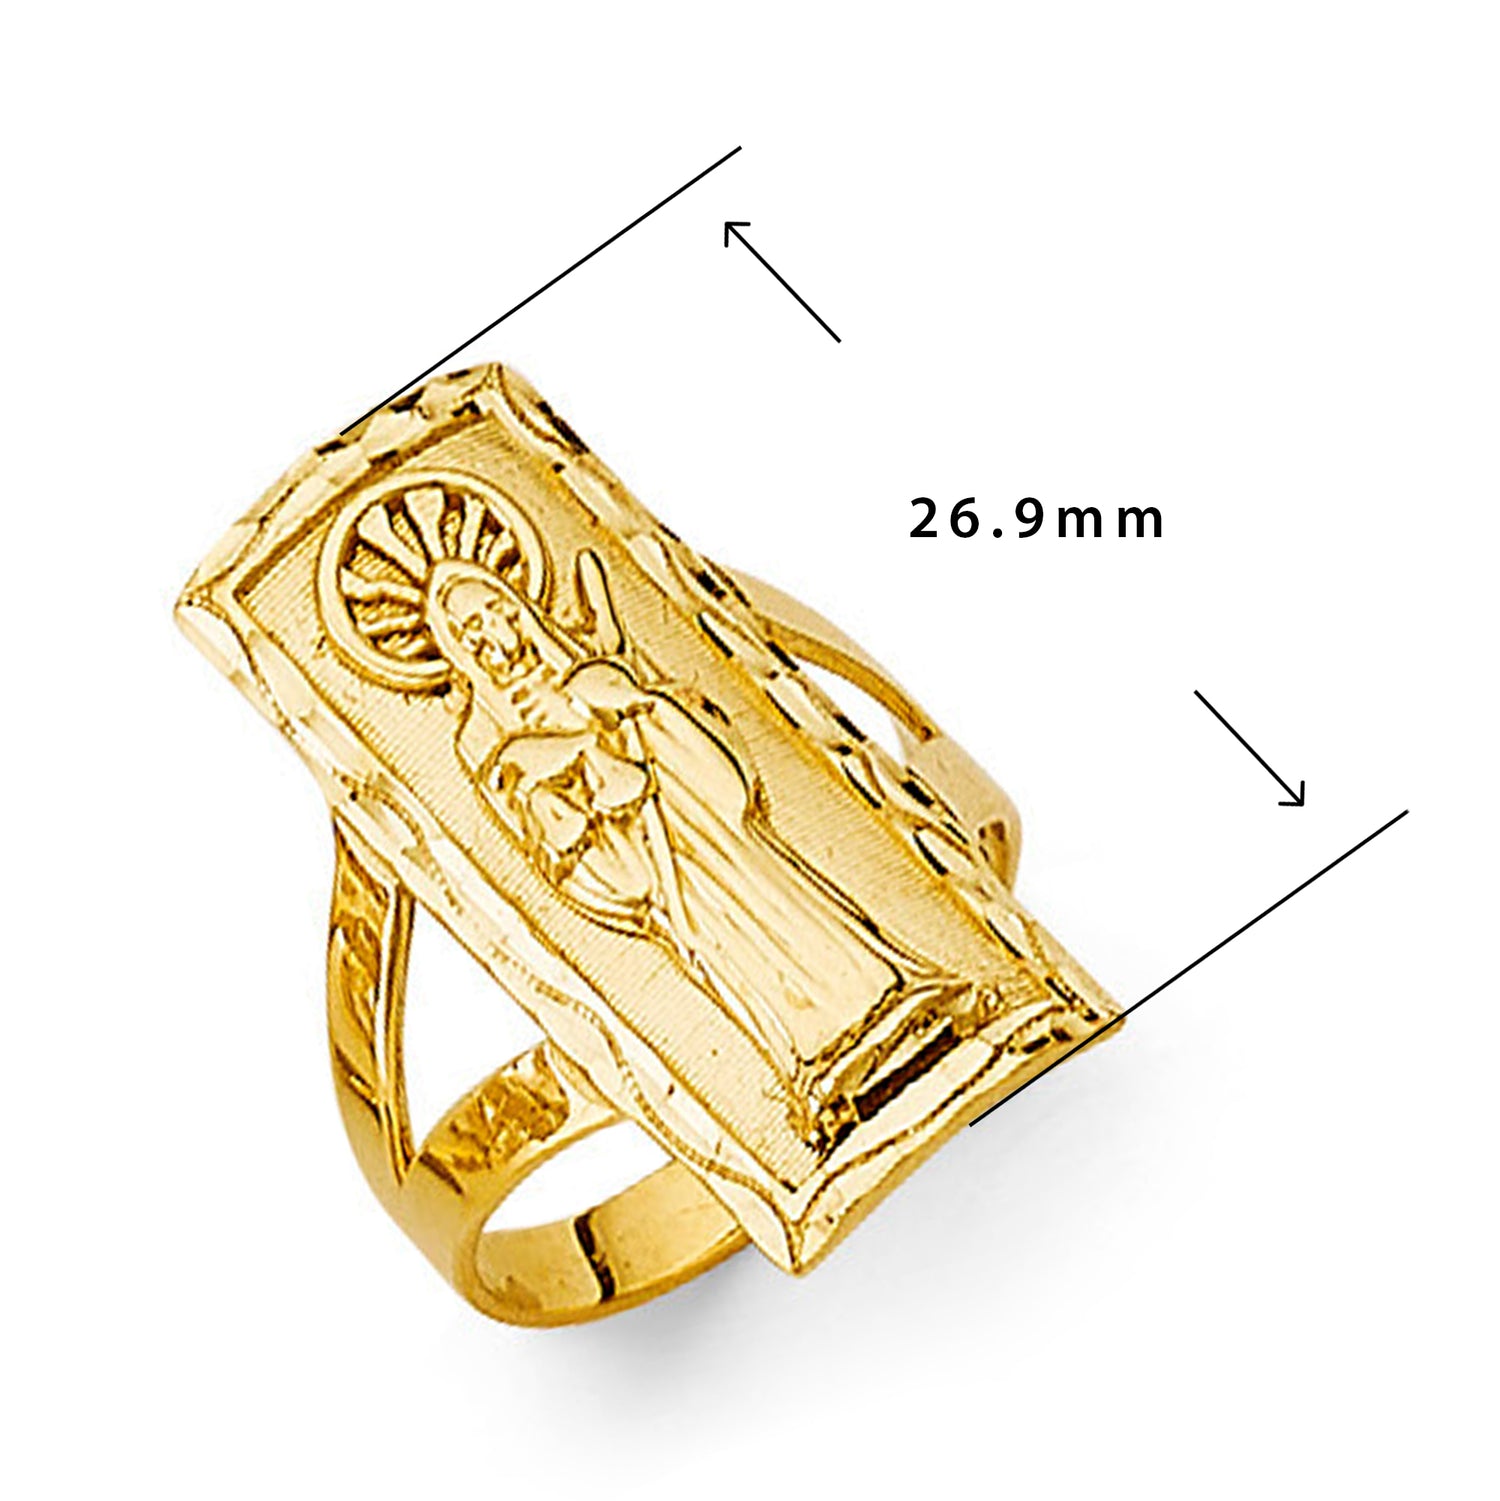 Sab Muerte Casting Ring in Solid Gold with Measurement